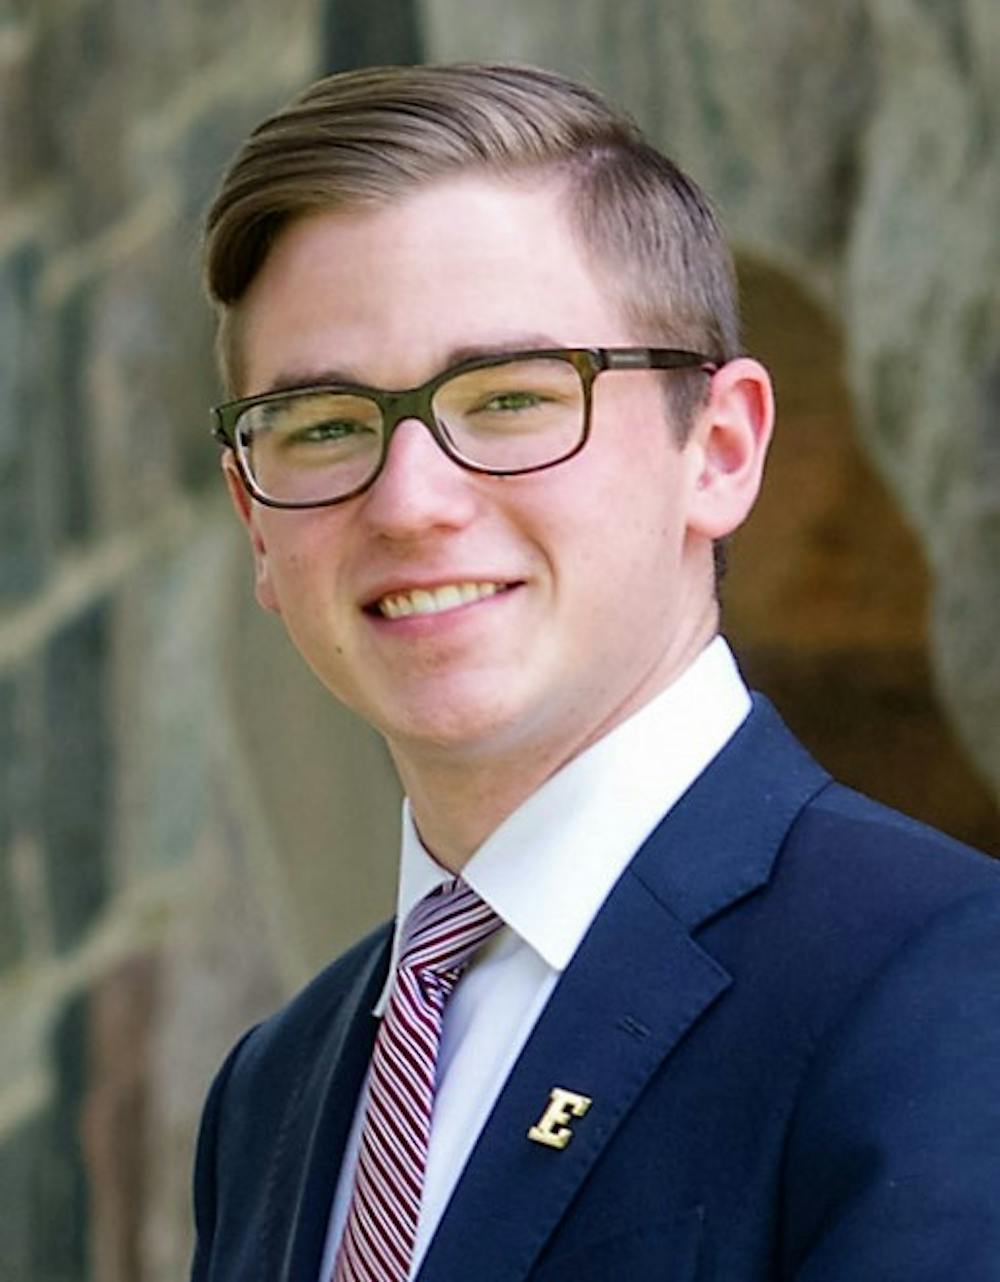 Student government president reflects on his time in office